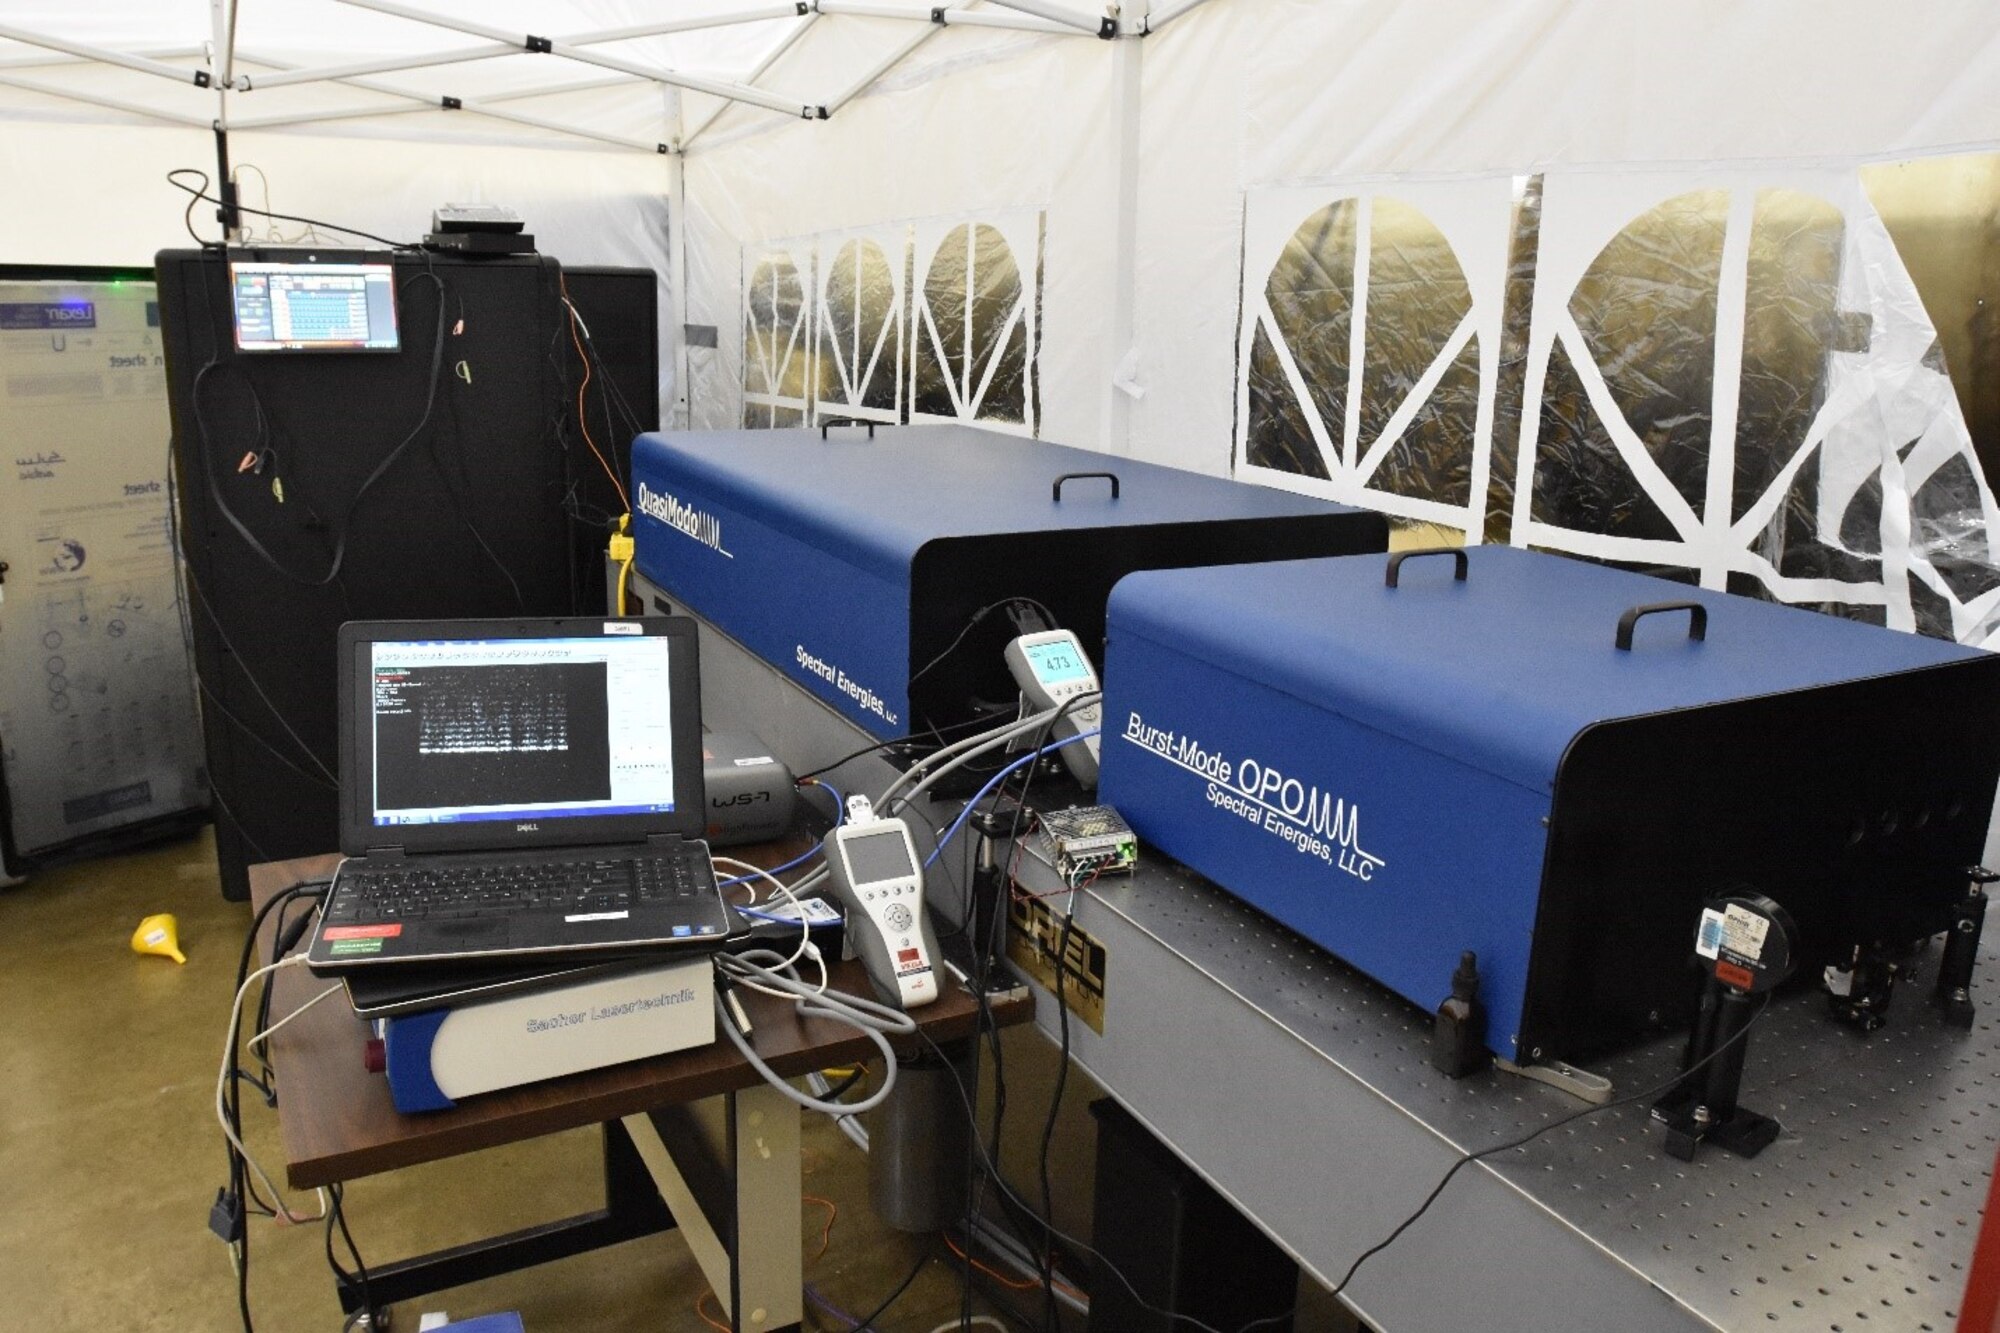 Pictured is the setup of the 100 kHz burst-mode laser-based KTV system, which includes the high-energy burst-mode laser and high-speed Optical Parametric Oscillator. The OPO was developed by Spectral Energies, LLC as part of a Small Business Innovation Research project funded to the company to look into increasing the data rates for the measurement of velocities in hypersonic wind tunnels. The SBIR project was successfully demonstrated at Arnold Engineering Development Complex Hypervelocity Wind Tunnel 9. (U.S. Air Force photo)